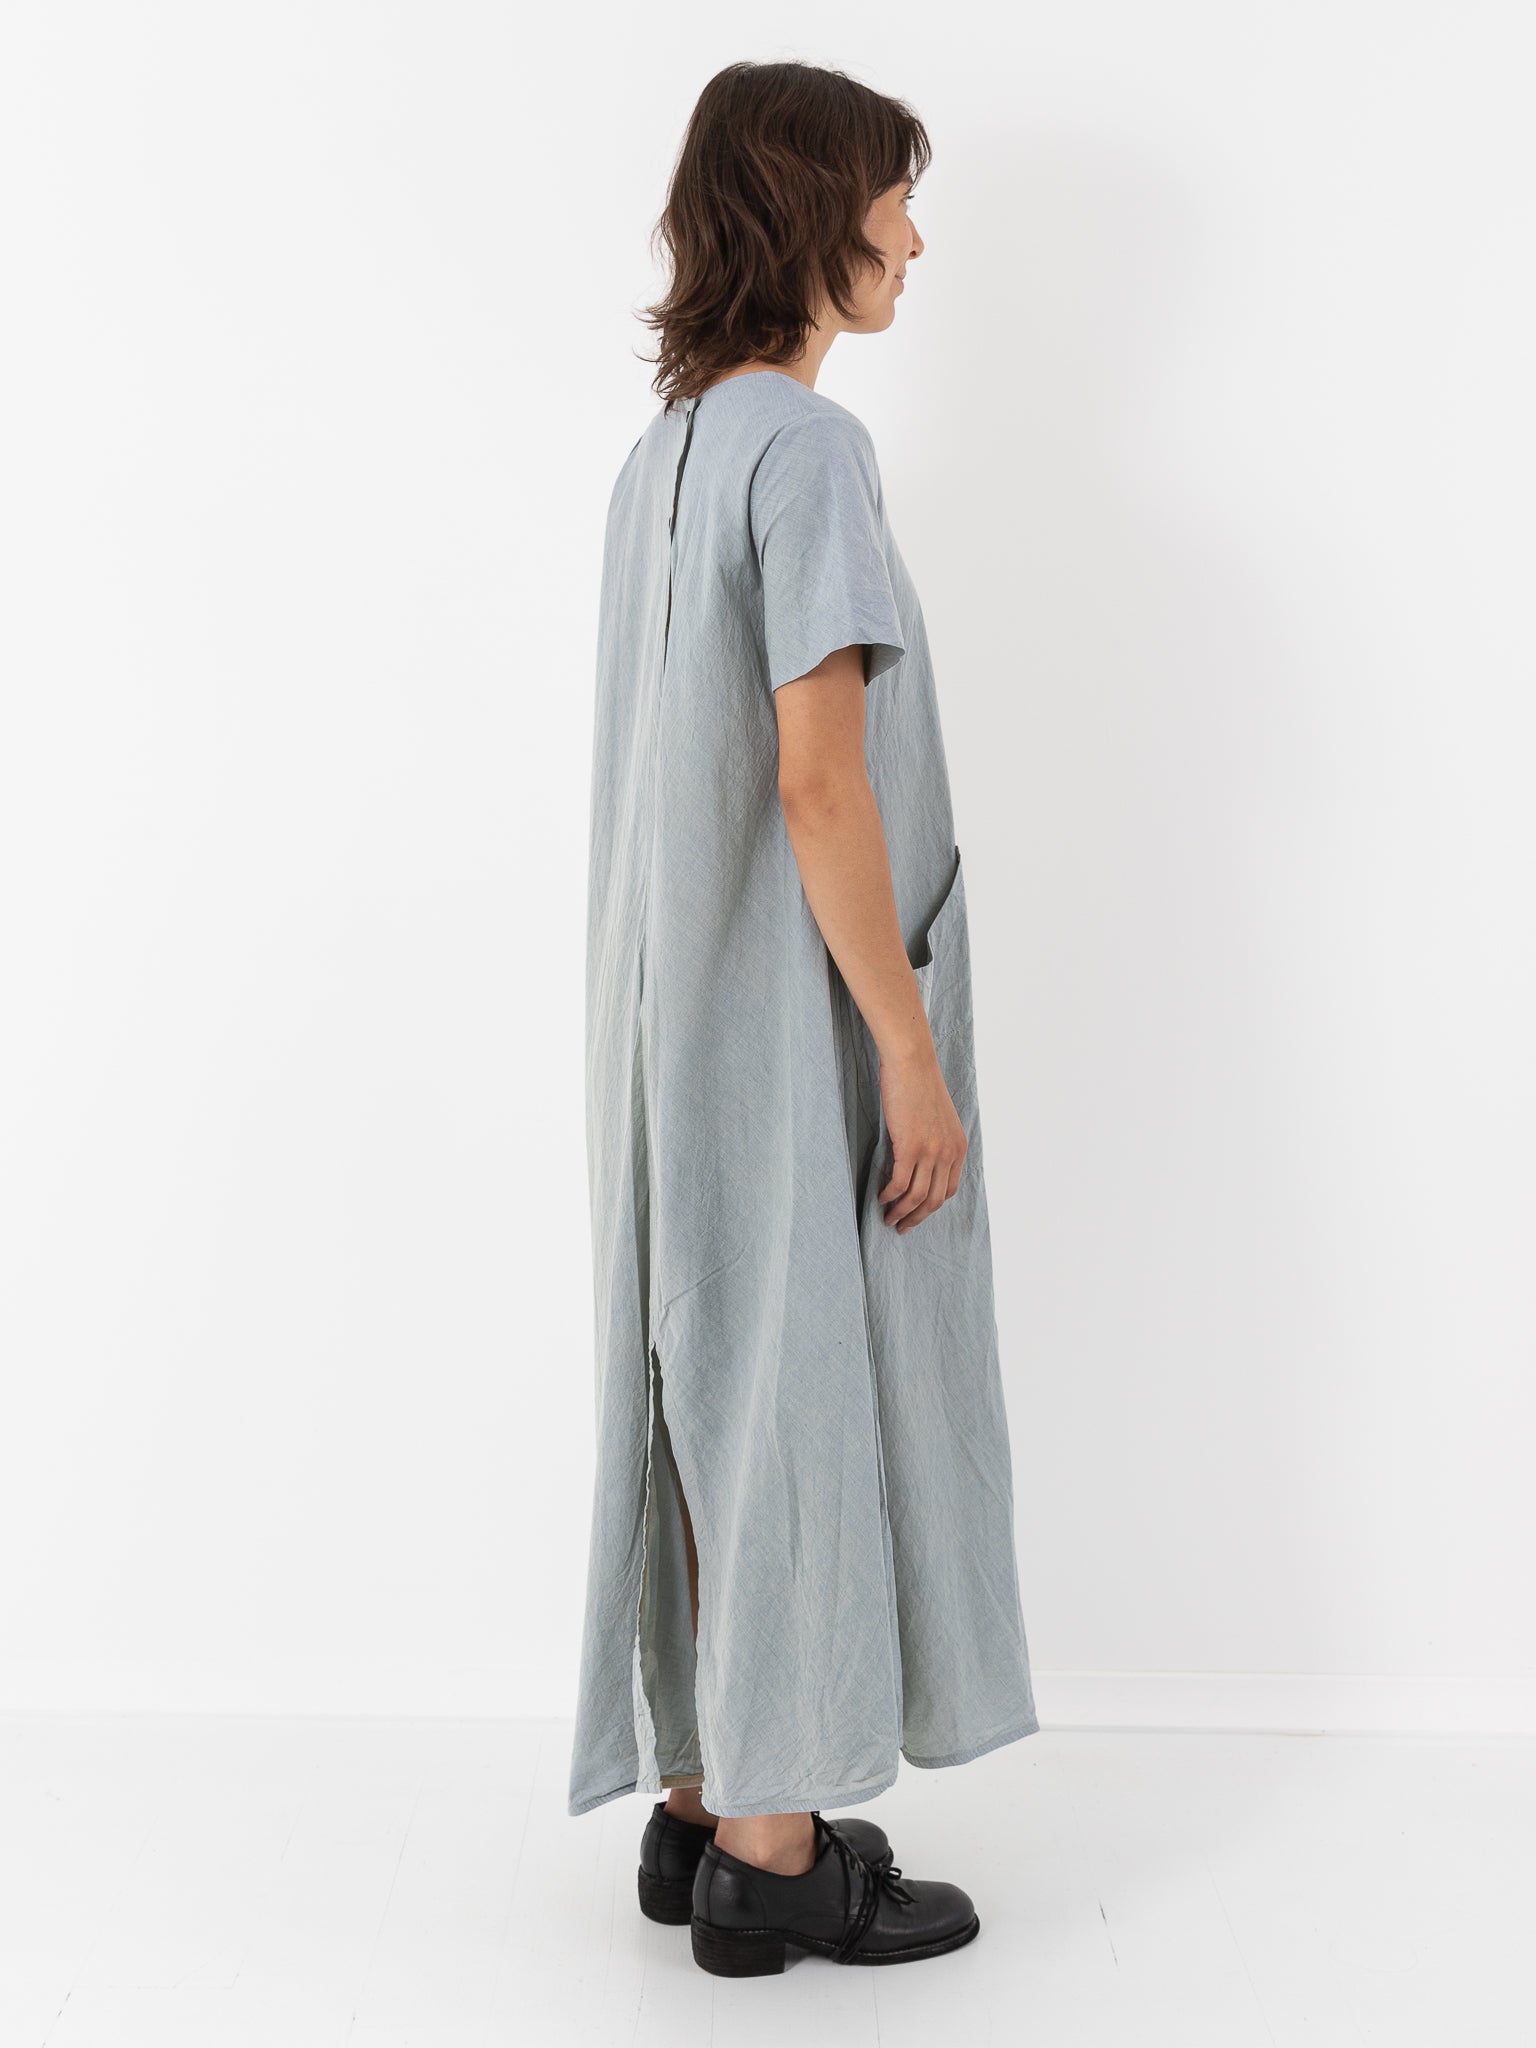 Atelier Suppan Twisted Dress, Light - Worthwhile